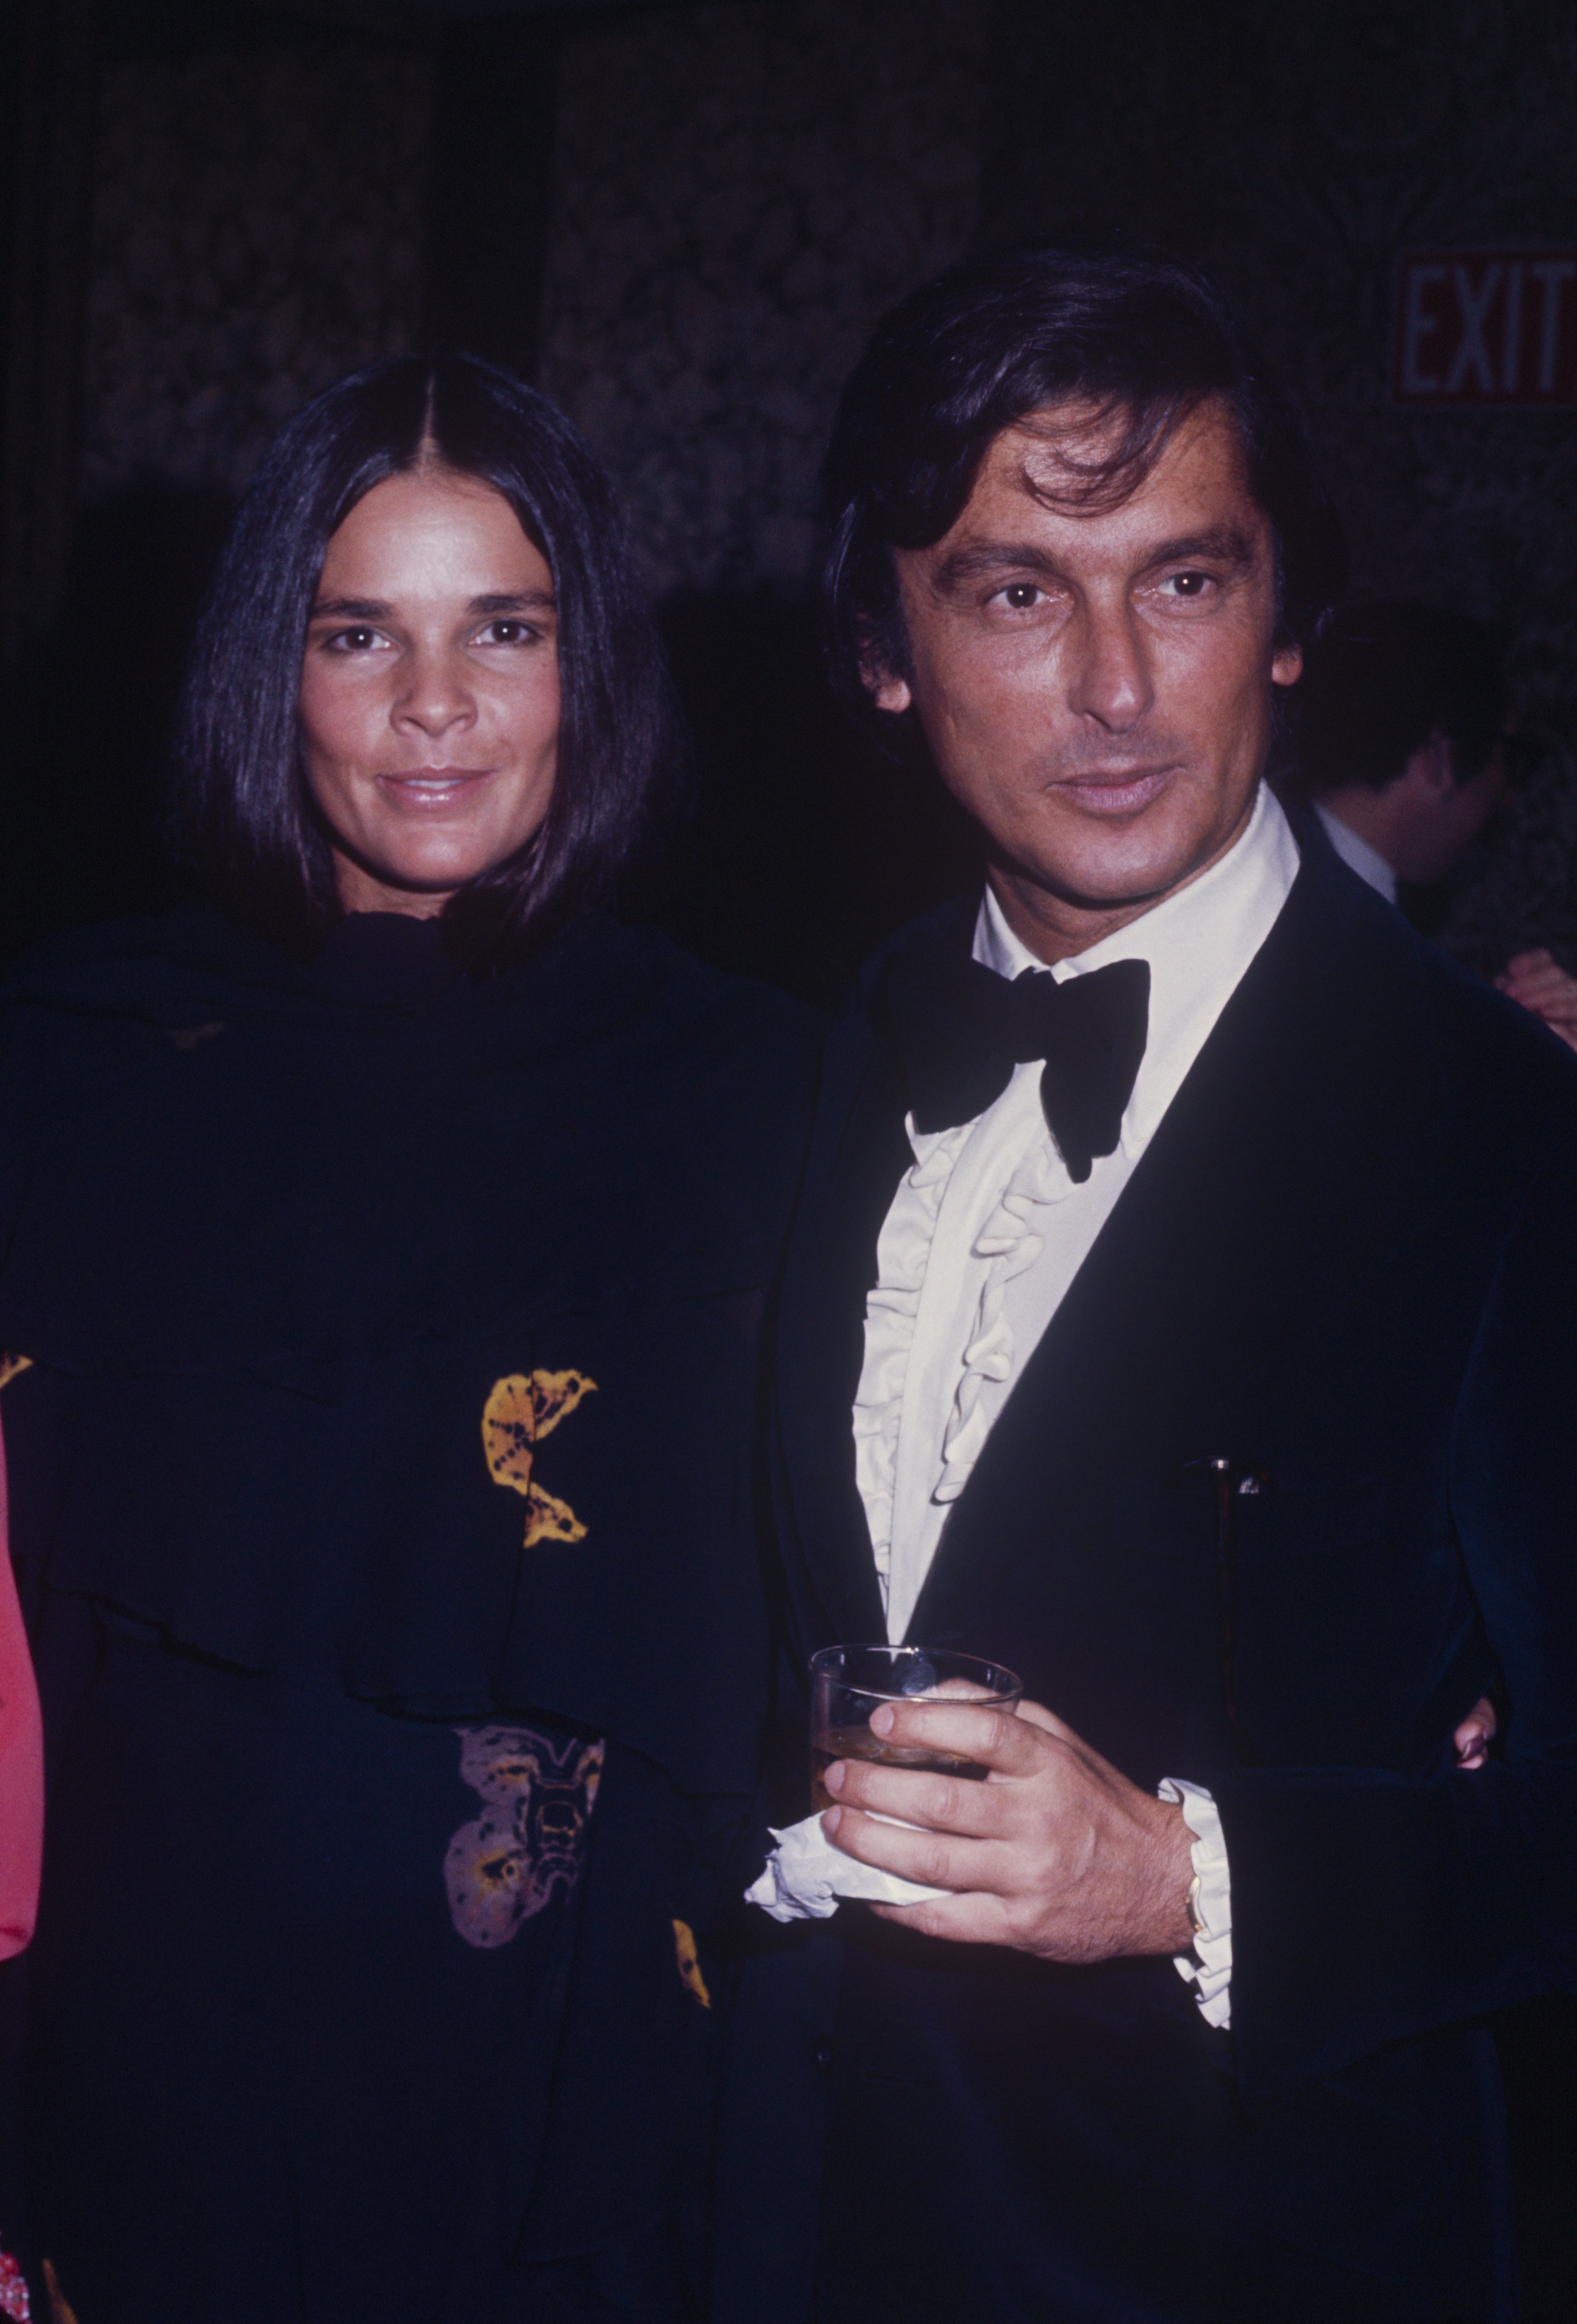 Ali MacGraw and Robert Evans at a formal event, circa 1970, in New York. | Source: Art Zelin/Getty Images